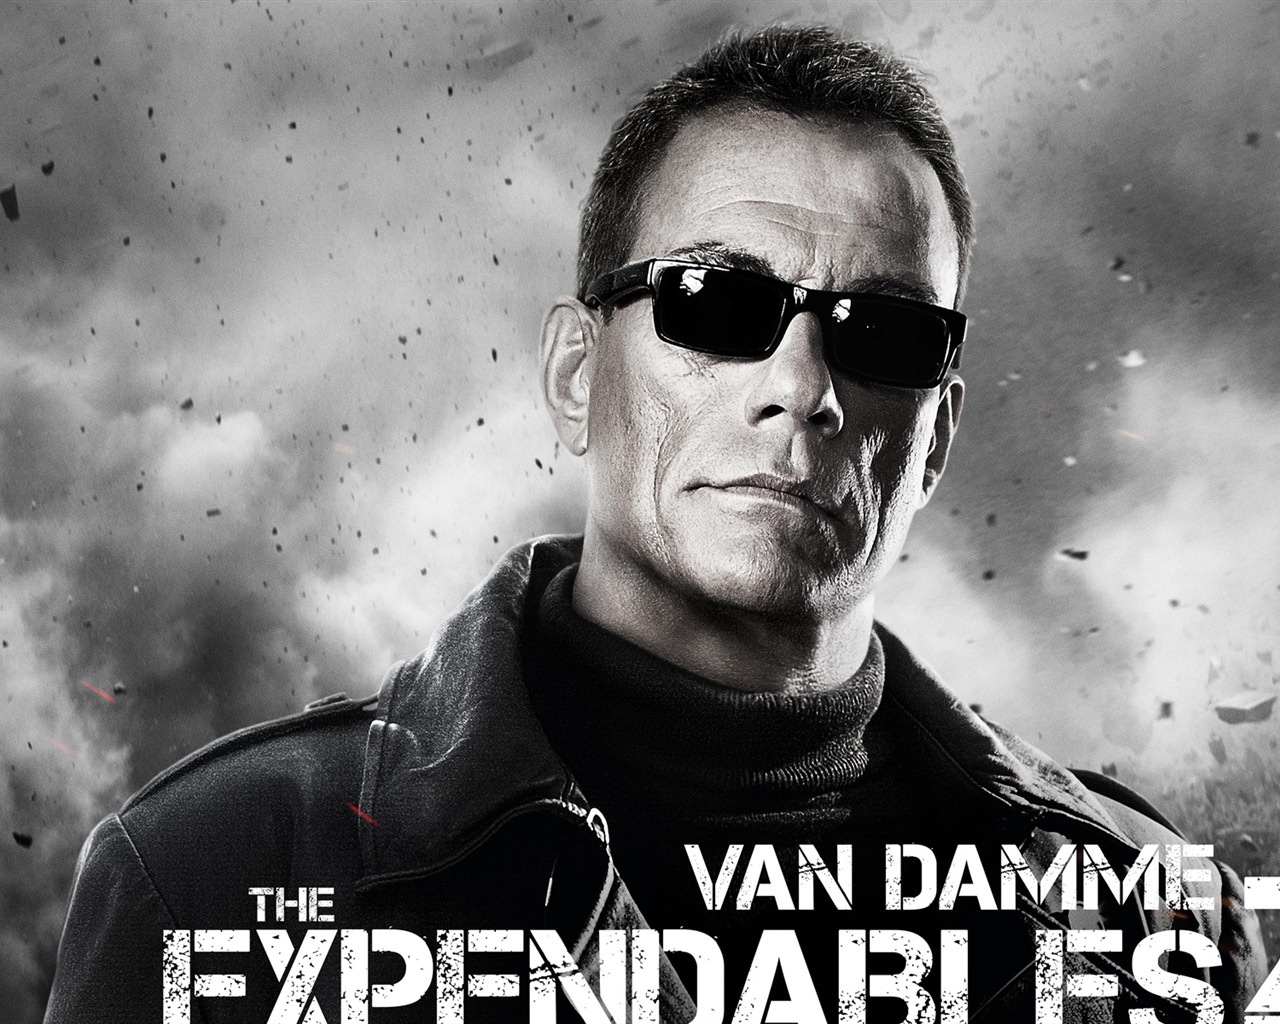 2012 The Expendables 2 HD Wallpaper #6 - 1280x1024